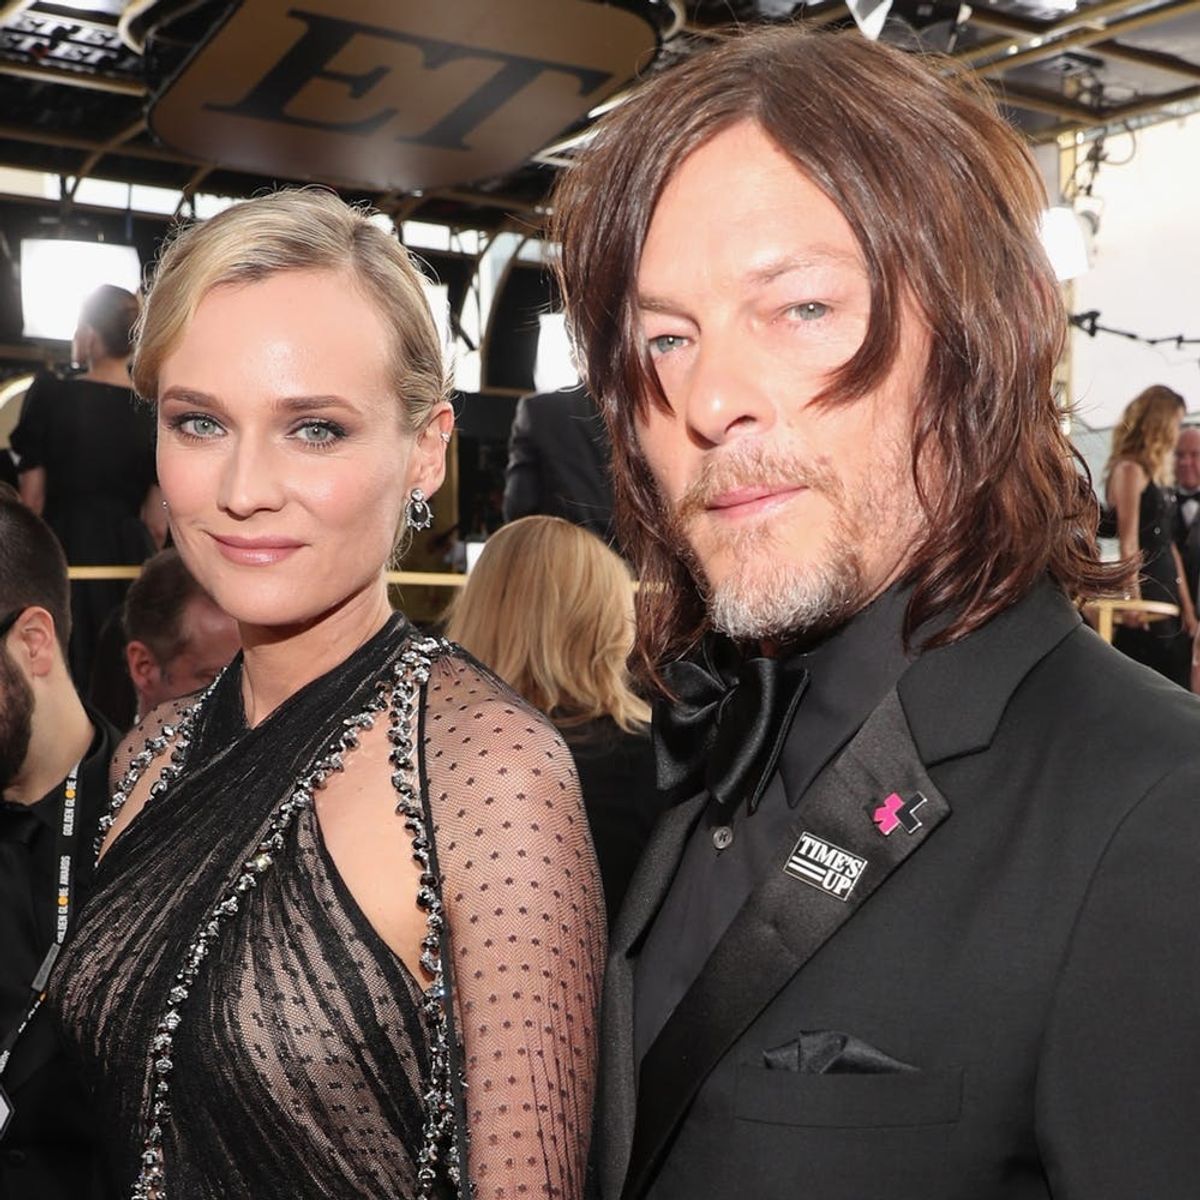 Diane Kruger and Norman Reedus Made Their Red-Carpet Debut at the 2018 Golden Globes